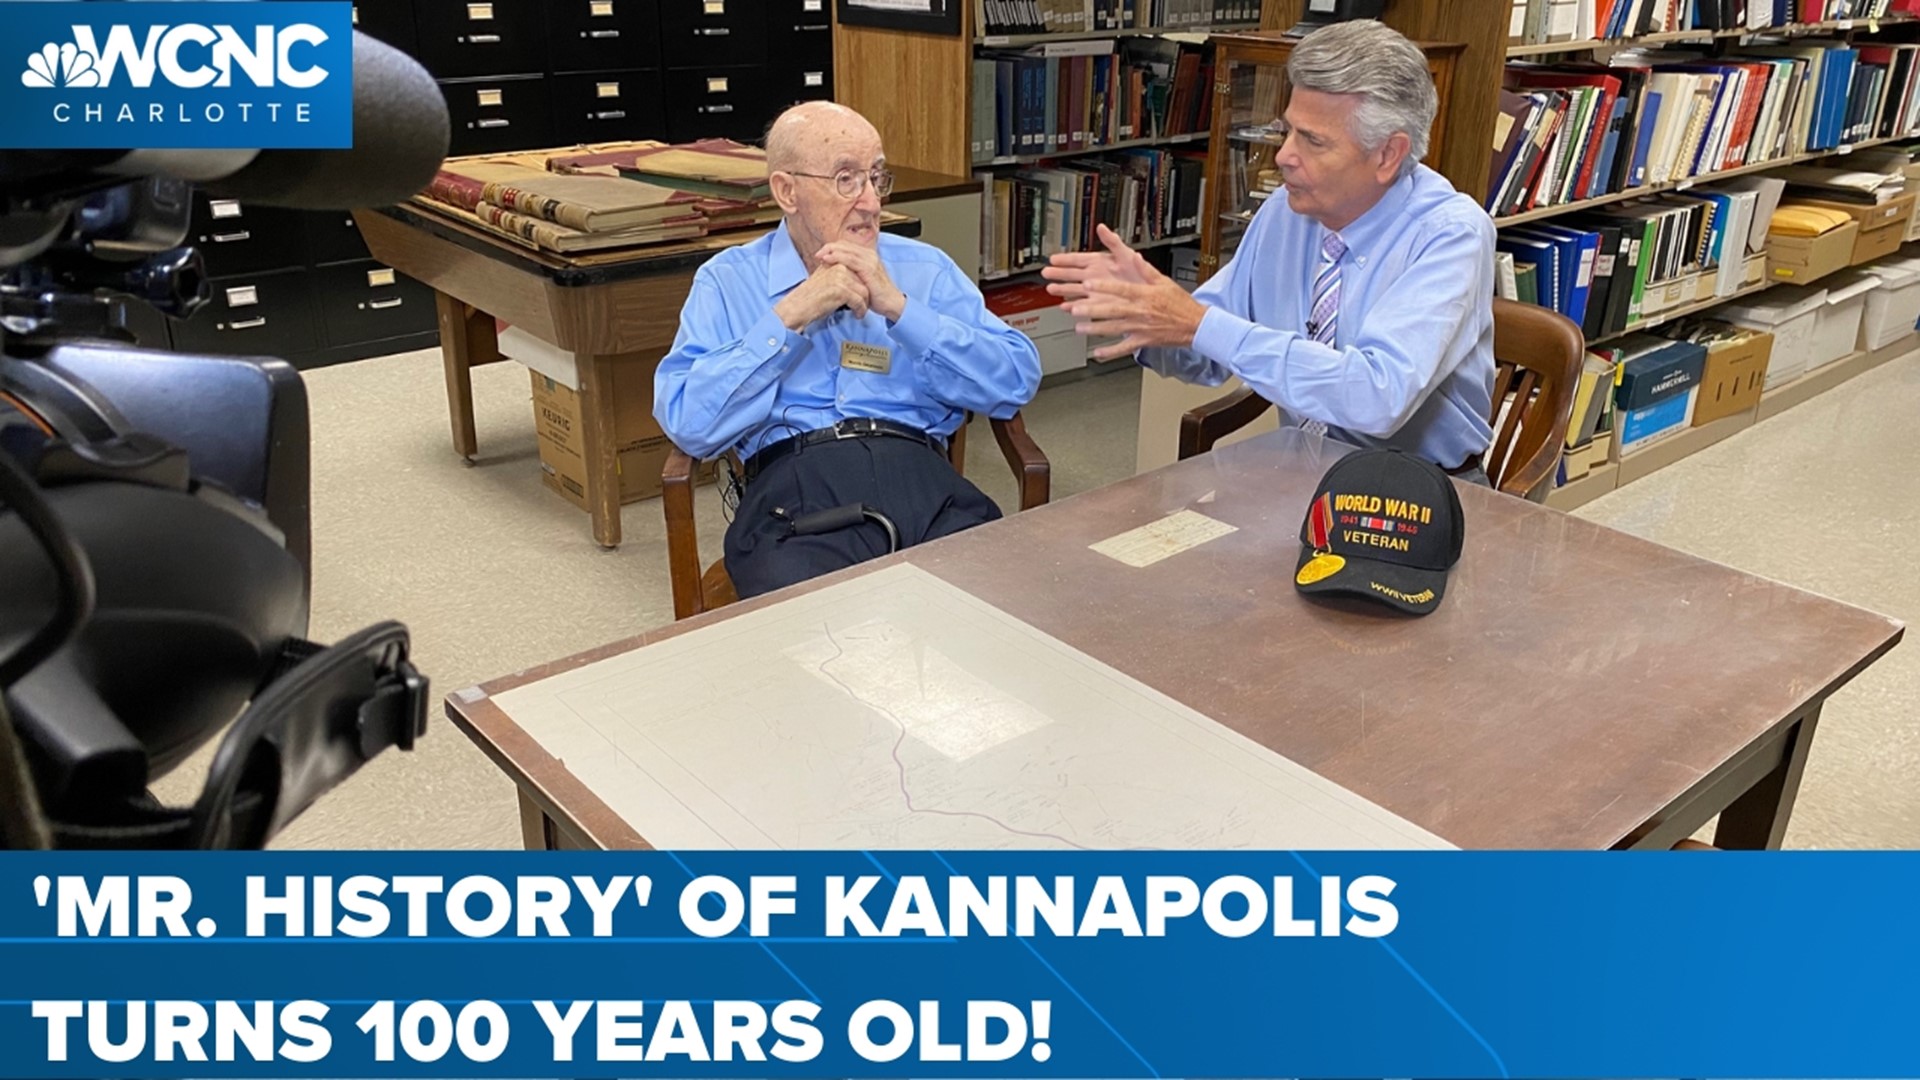 Known as "Mr. History," Norris Dearmon knows a thing or two about Kannapolis. And he should, having spent most of his 99 years in the once booming textile town.